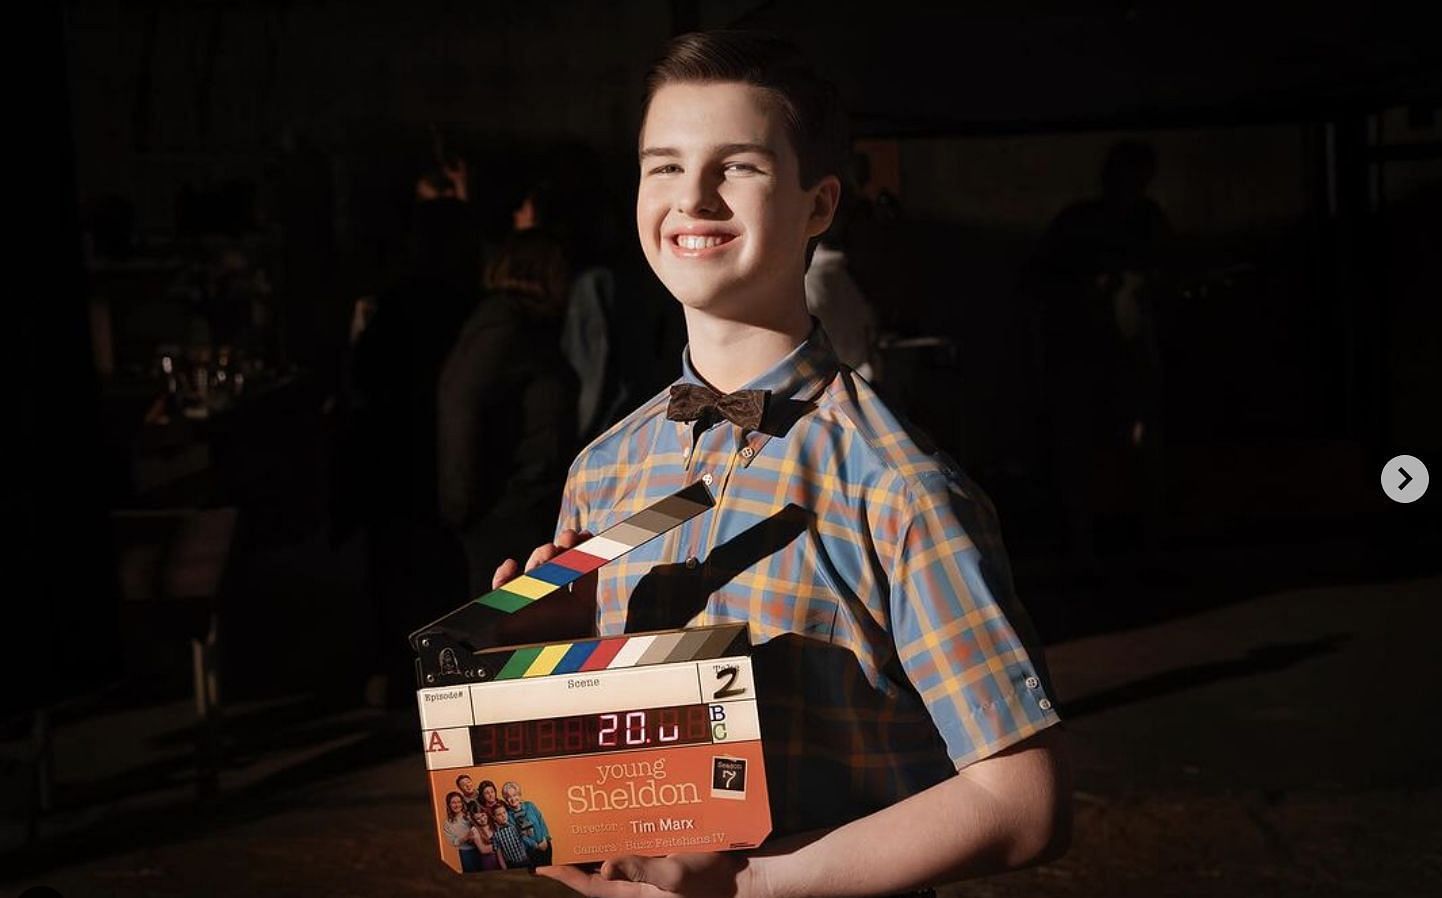 A still of the protagonist in the spin-off series Young Sheldon (Image via Instagram/youngsheldoncbs)